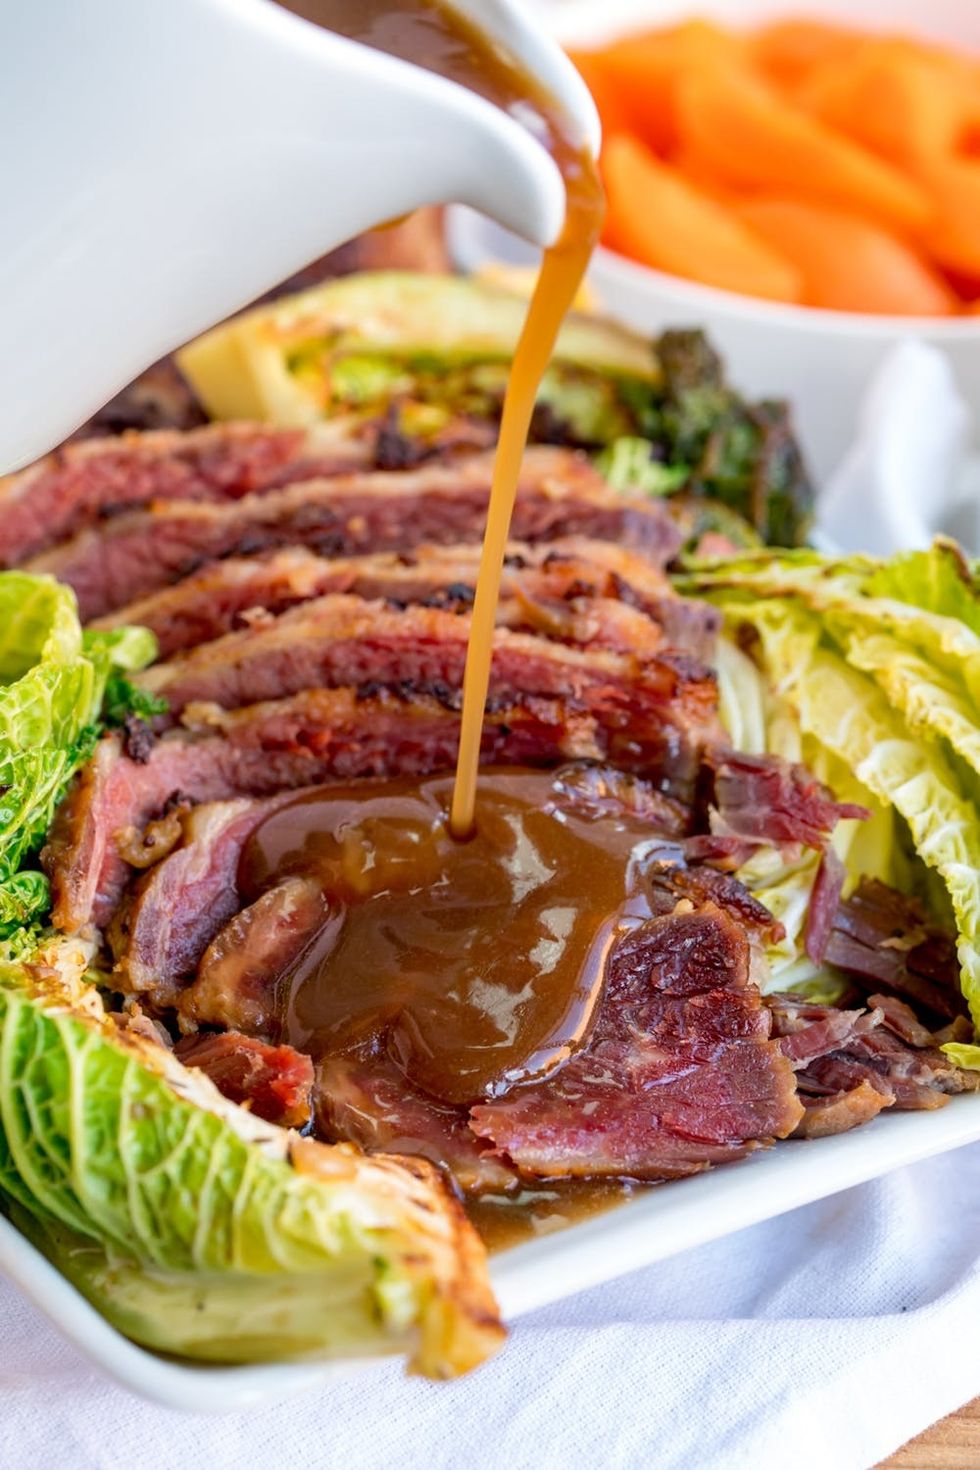 Making This Corned Beef With Cabbage Recipe FROM SCRATCH Will Impress Everyone!